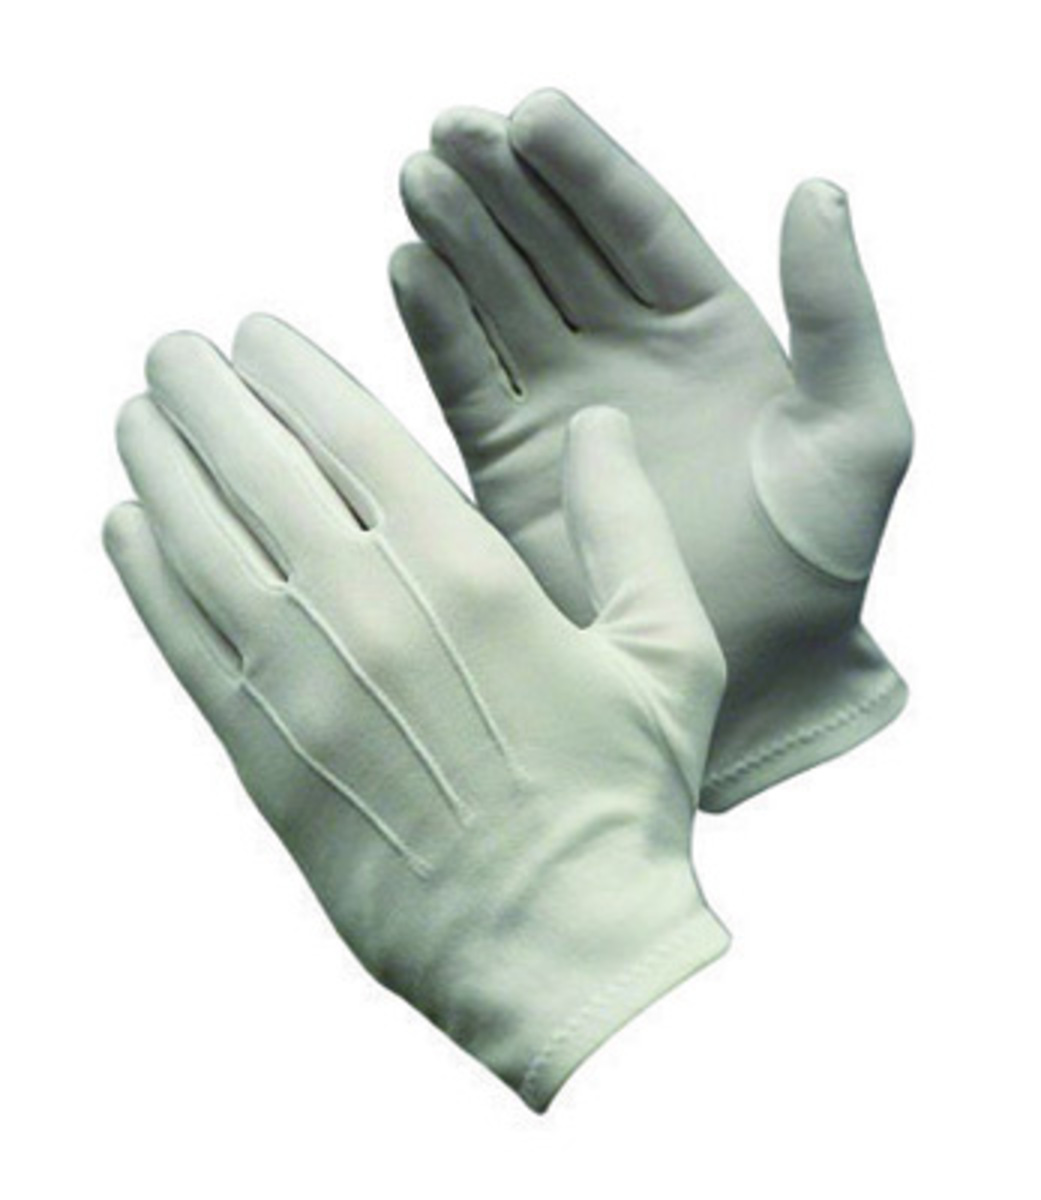 nylon gloves with OPEN cuffs for fine handling White polyester size 8 Medium